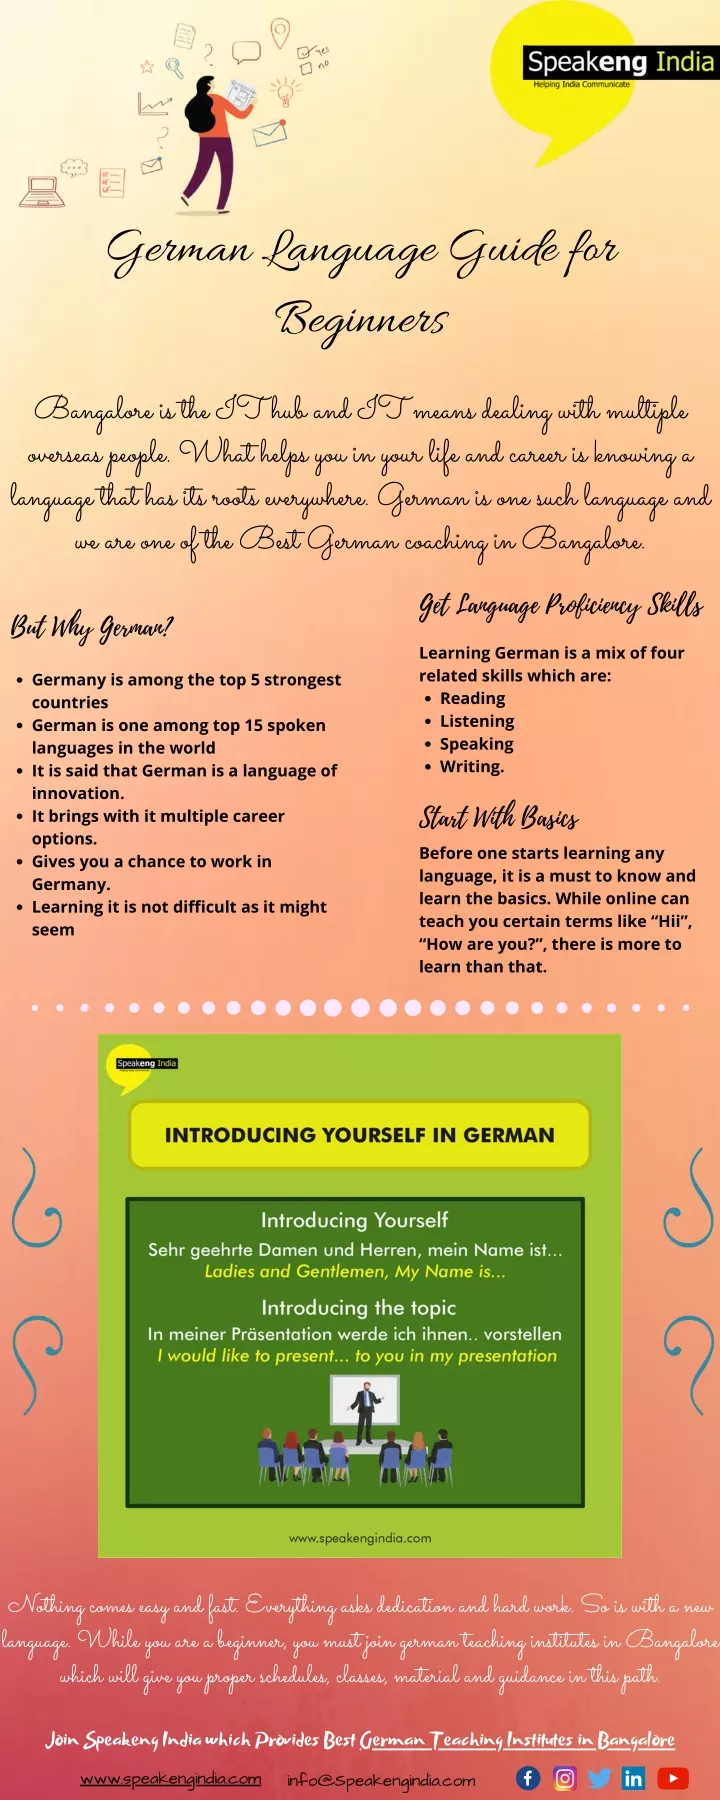 german language guide for beginners